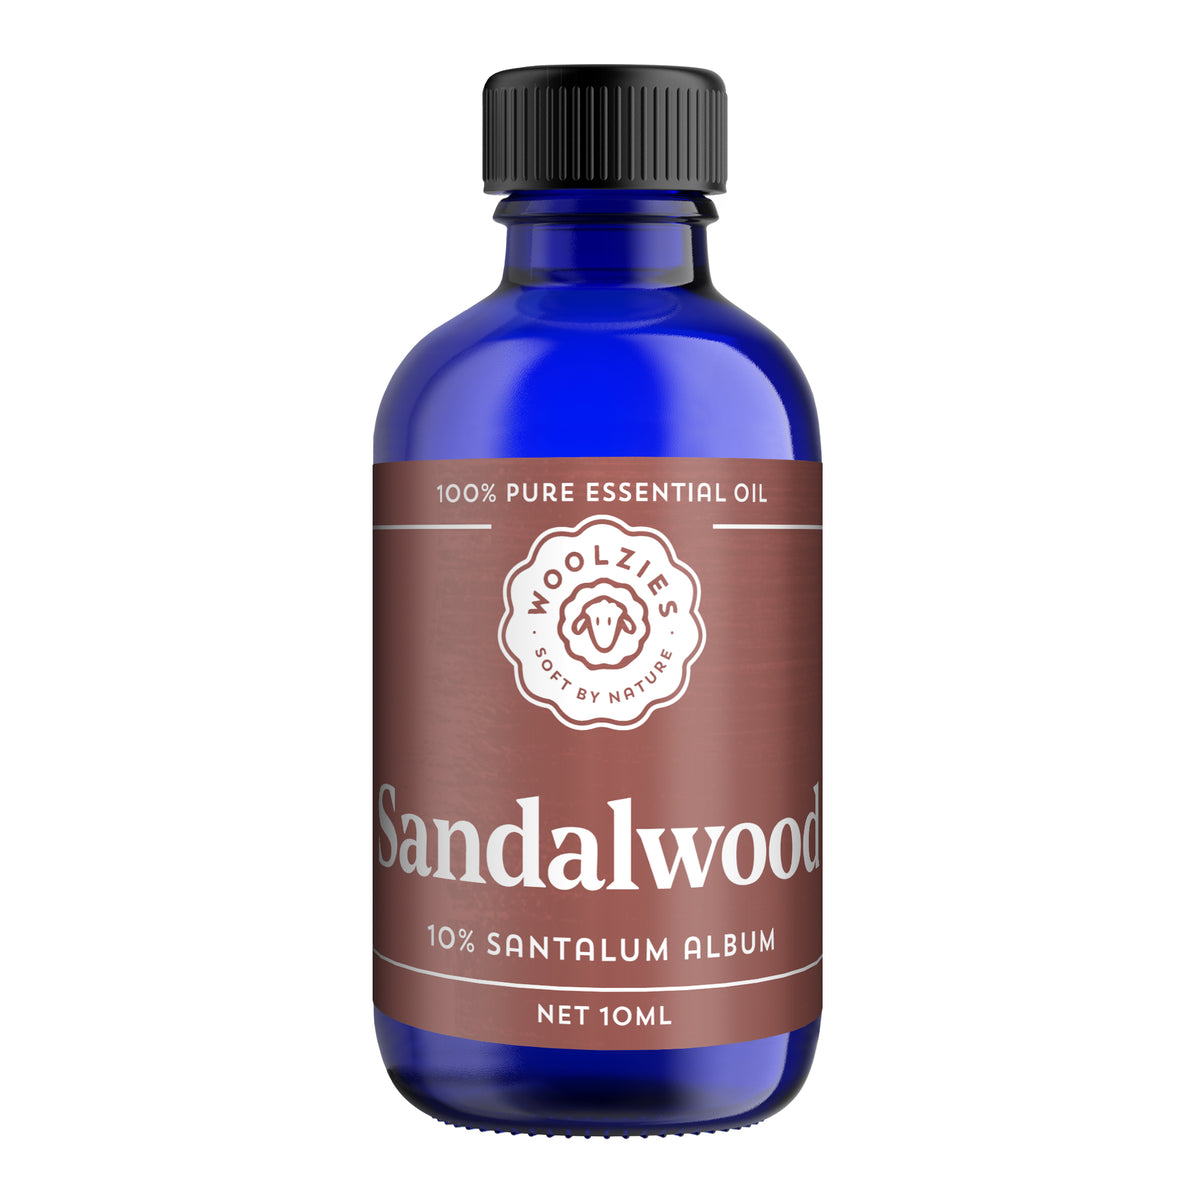 Sandalwood Santalum album Pure Therapeutic Aromatherapy Essential Oil –  Wild Herb Your Healthy Choice for Natural Living